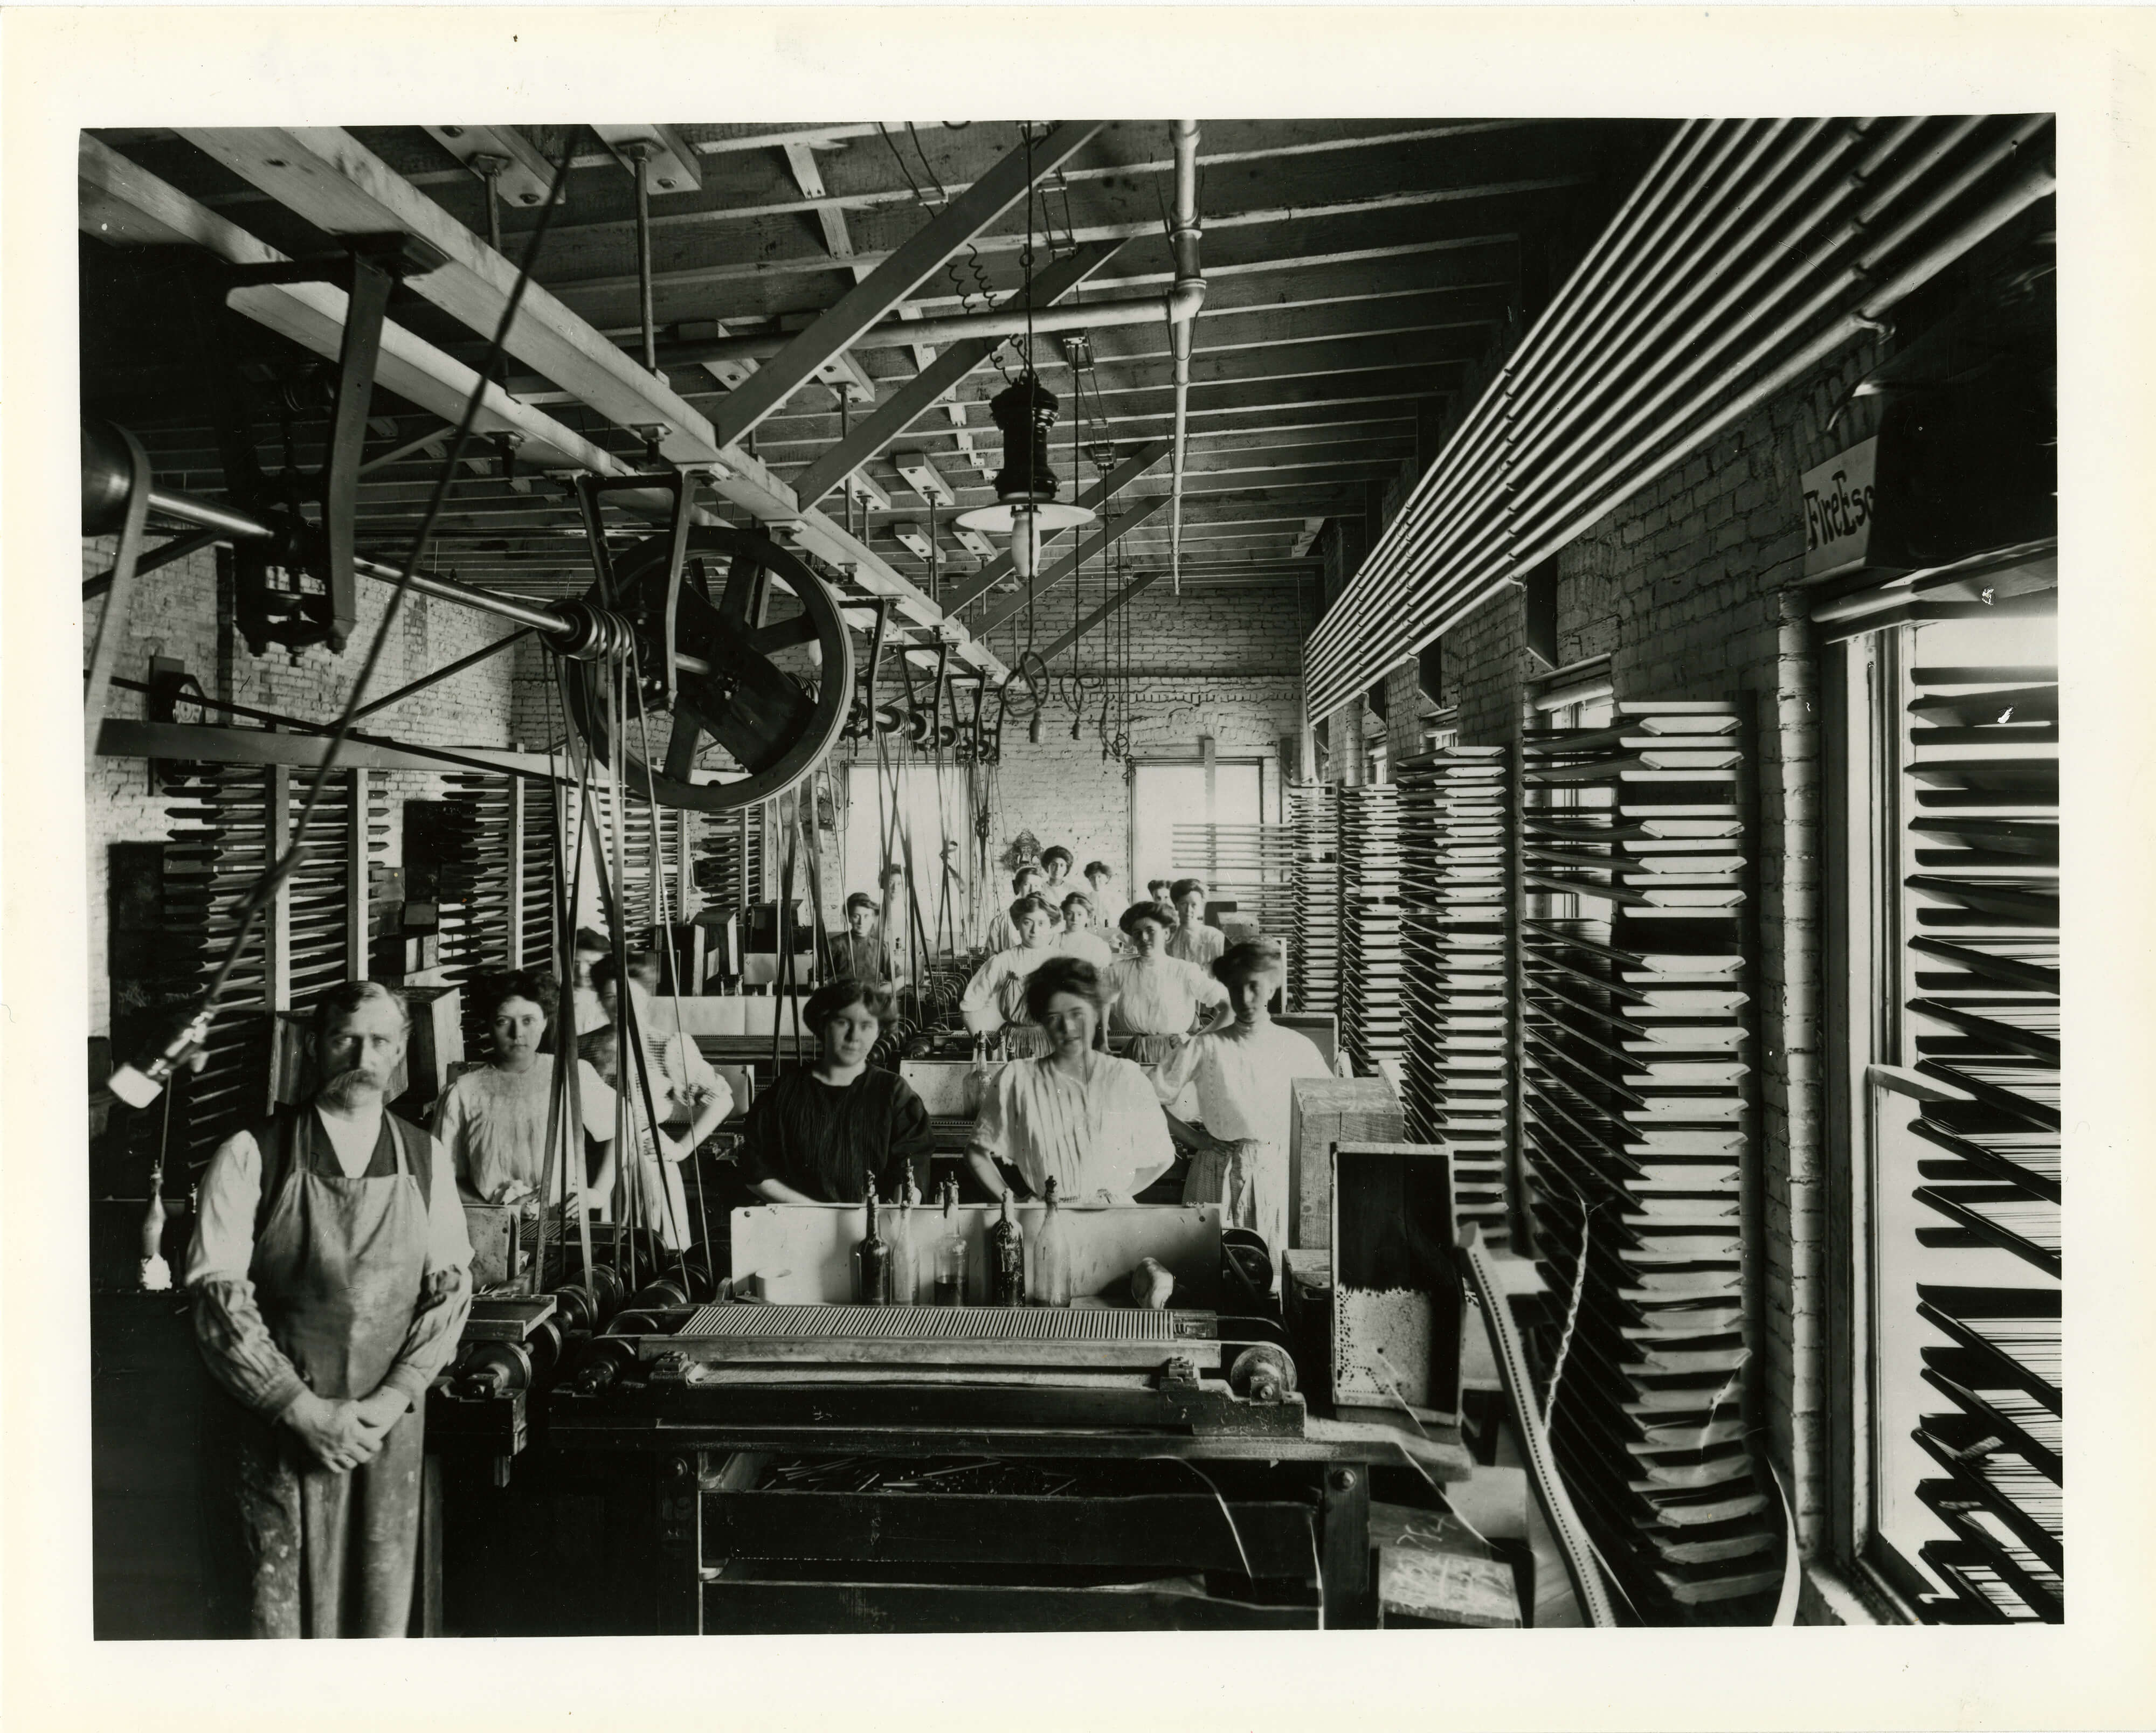 Eberhard Faber boxing and labeling department, circa 1920. Image via Brooklyn Historical Society